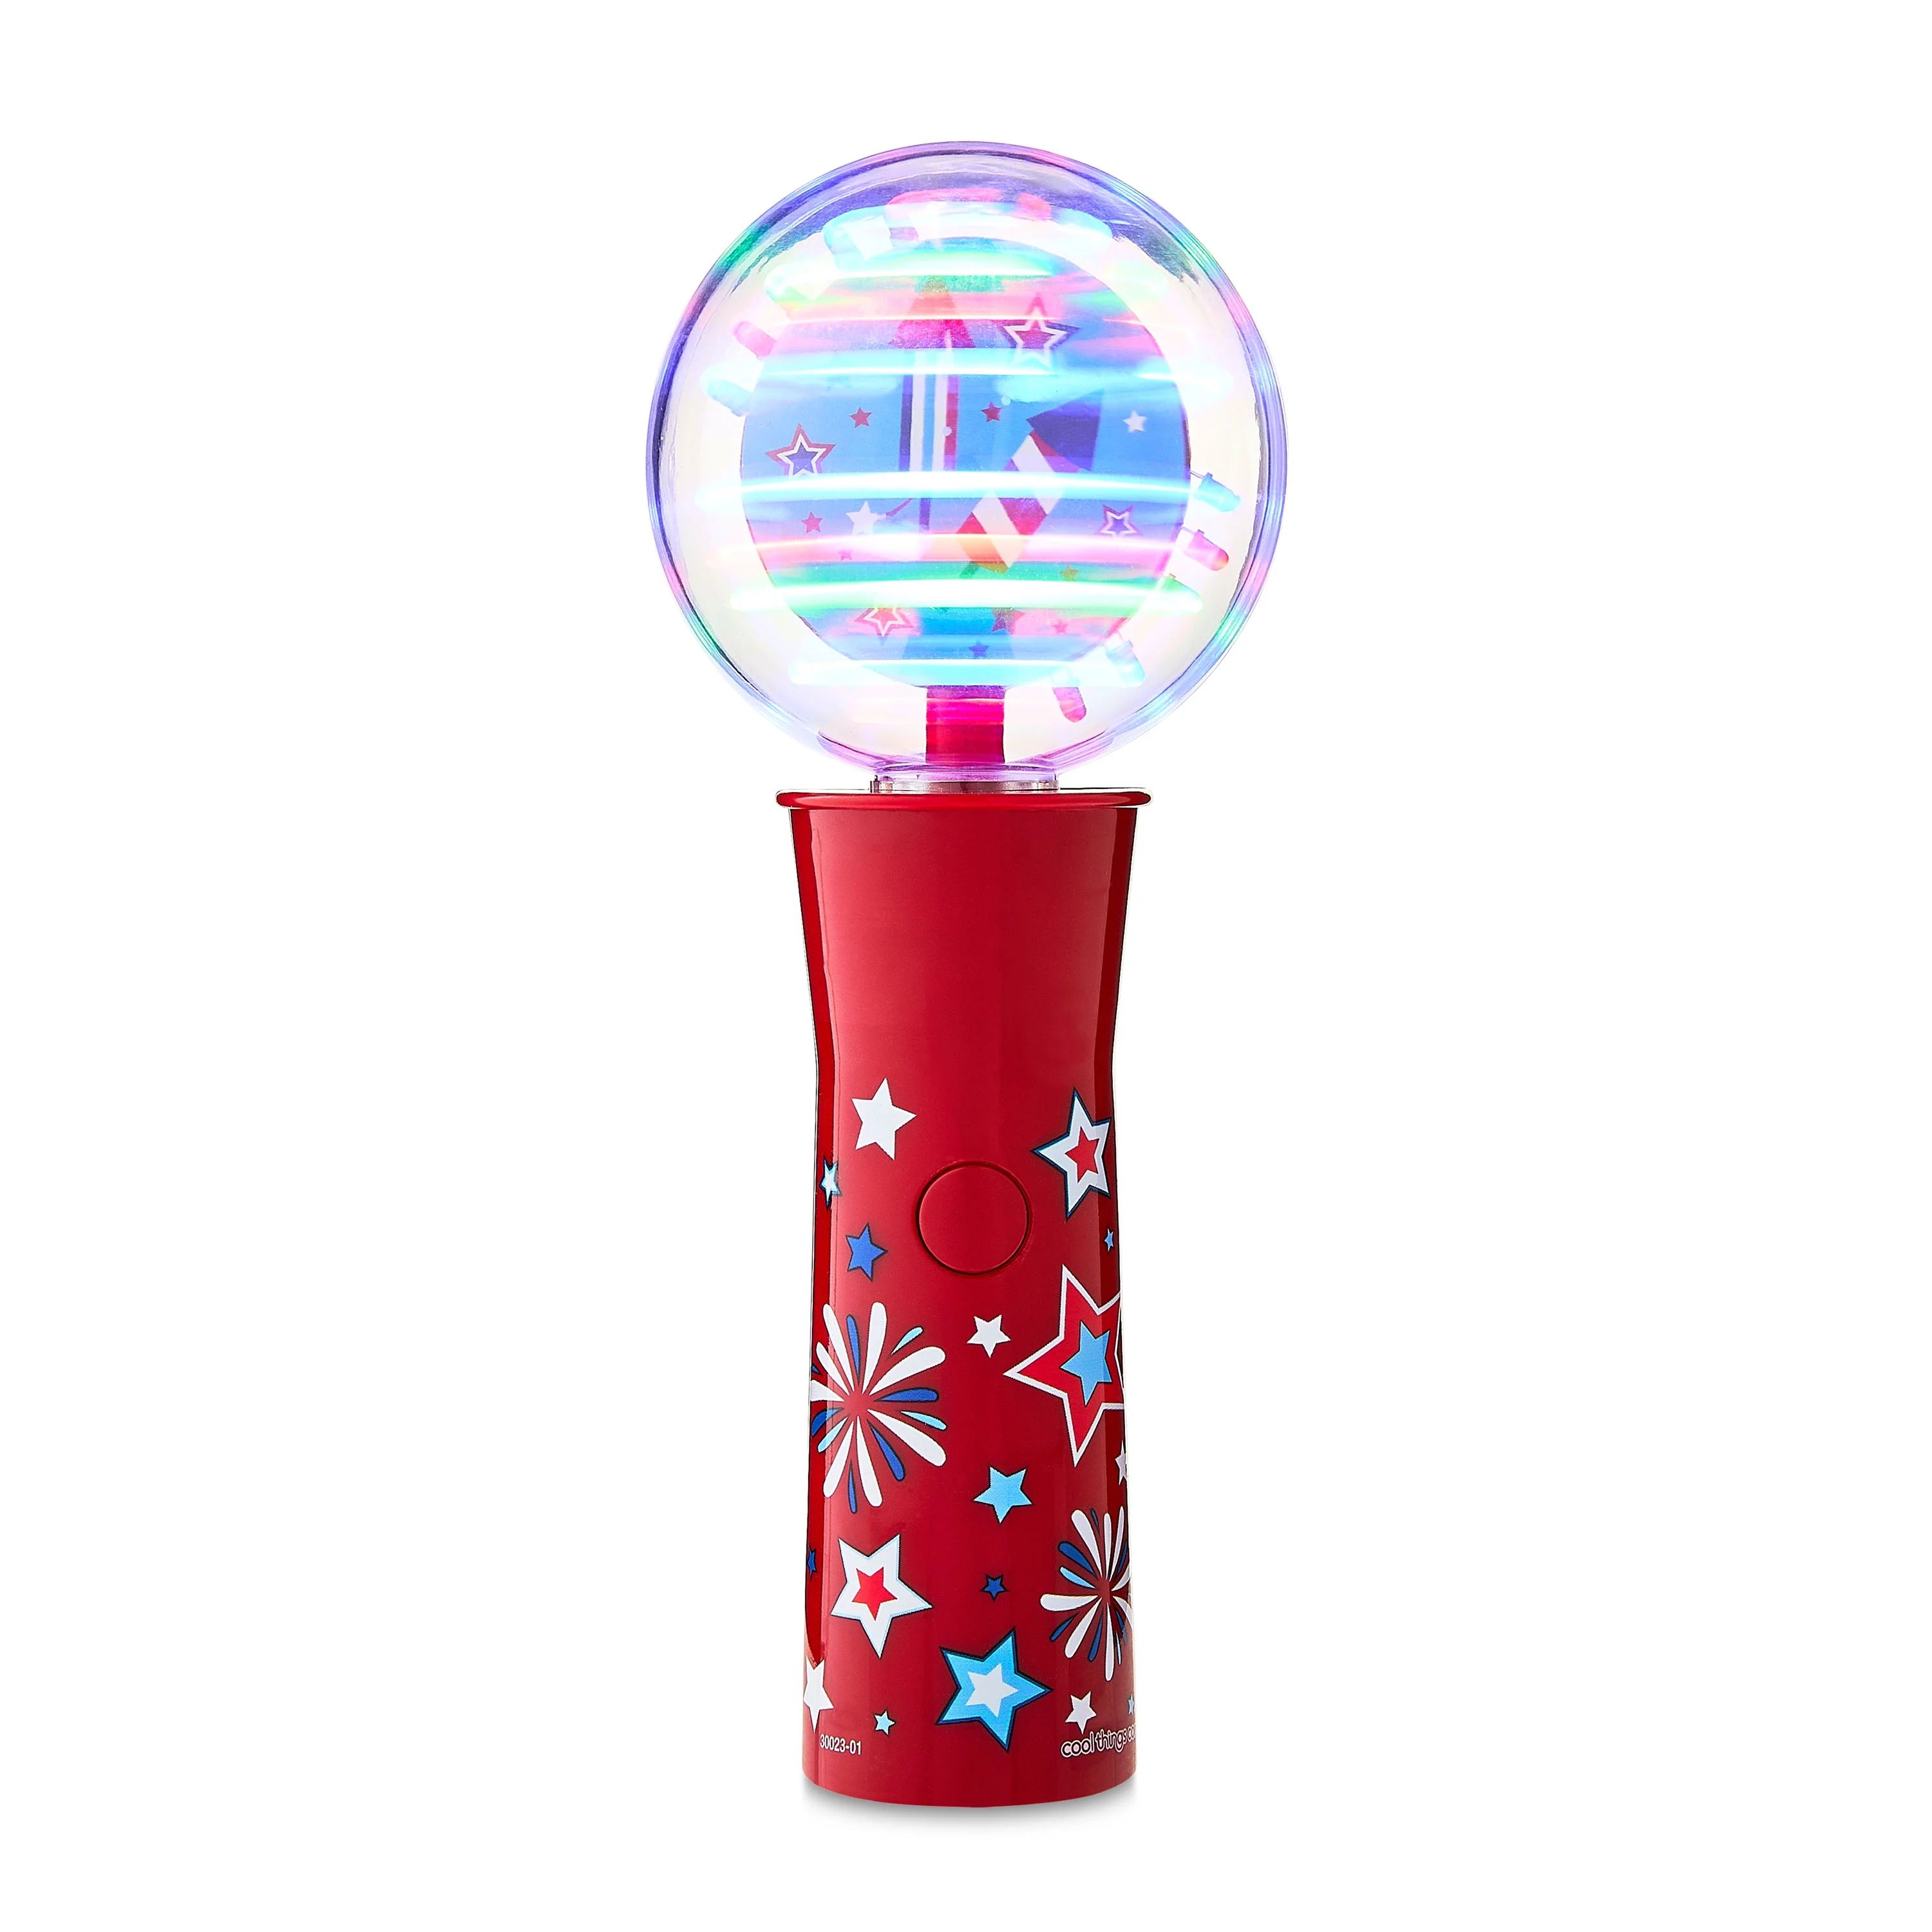 Patriotic Red Plastic Jumbo Light-up Spinner Toy by Way To Celebrate | Walmart (US)